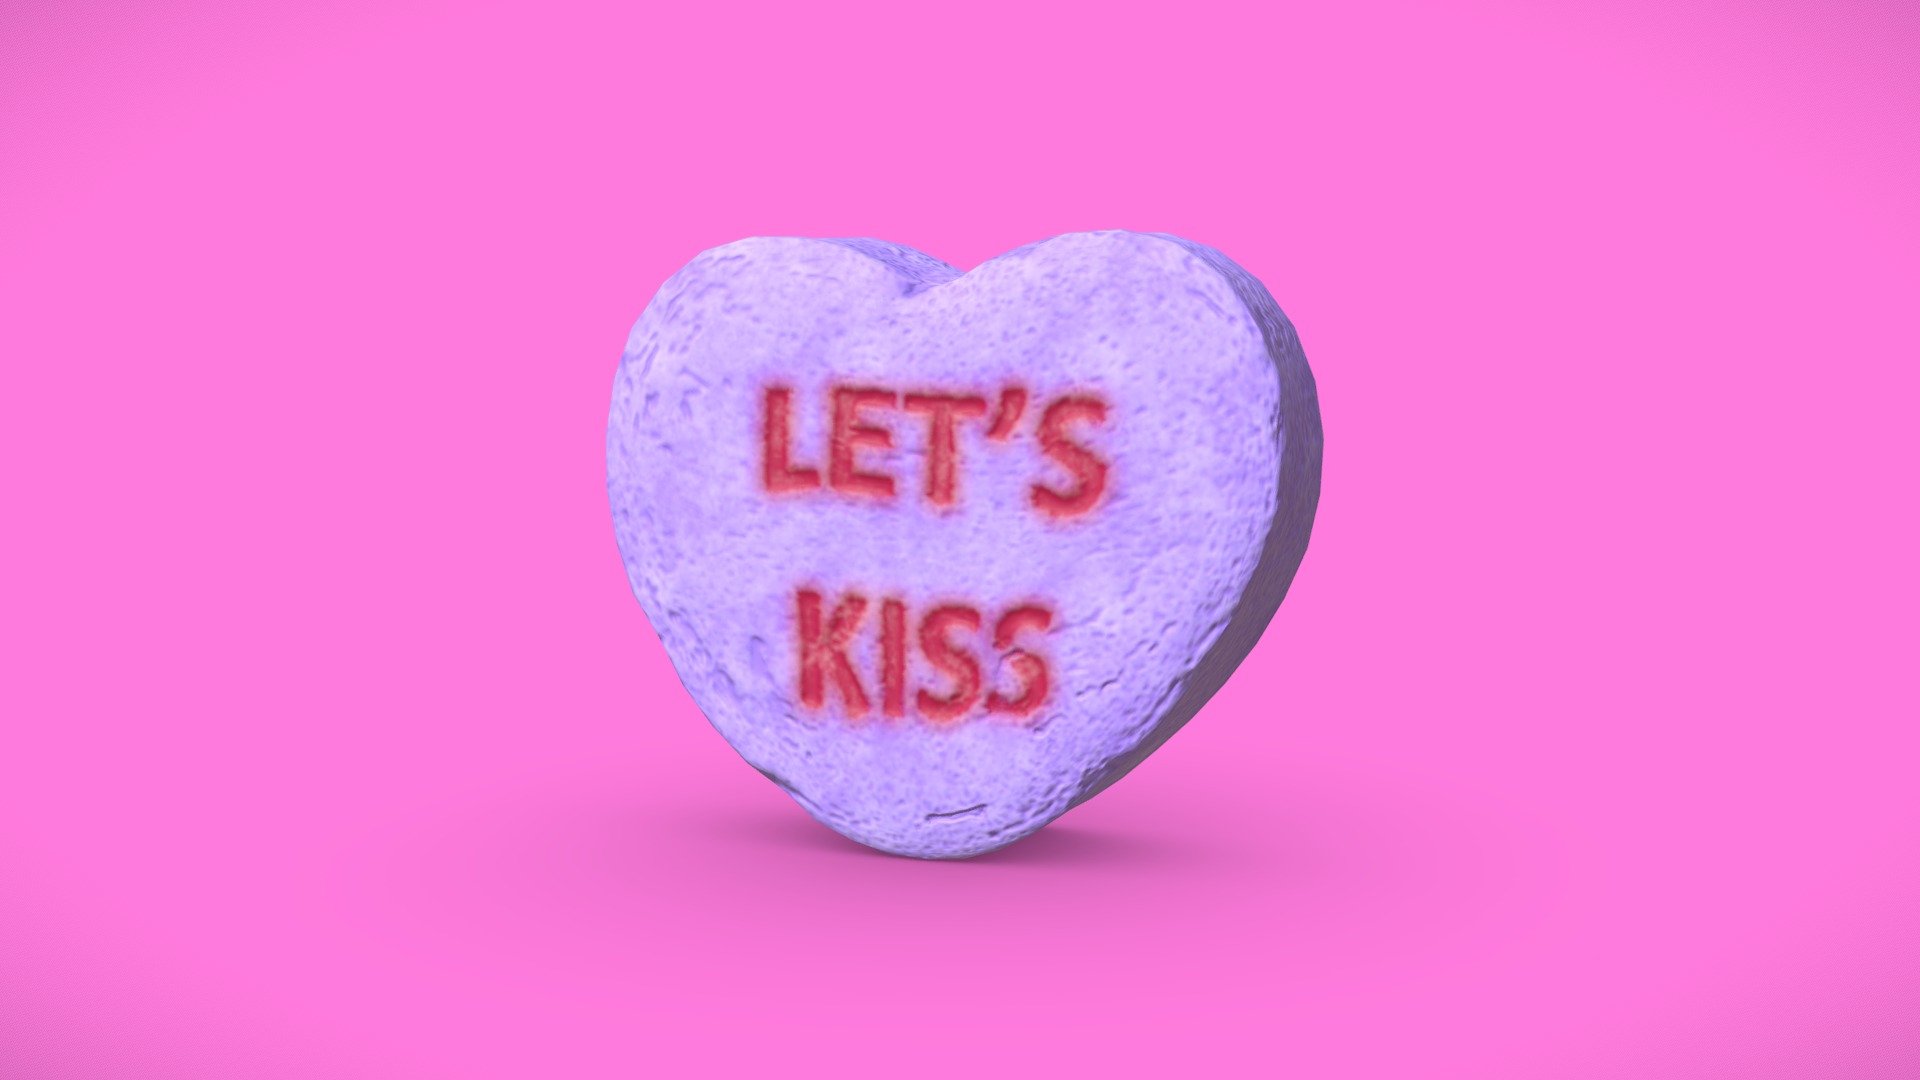 Heart Candy - Lets Kiss